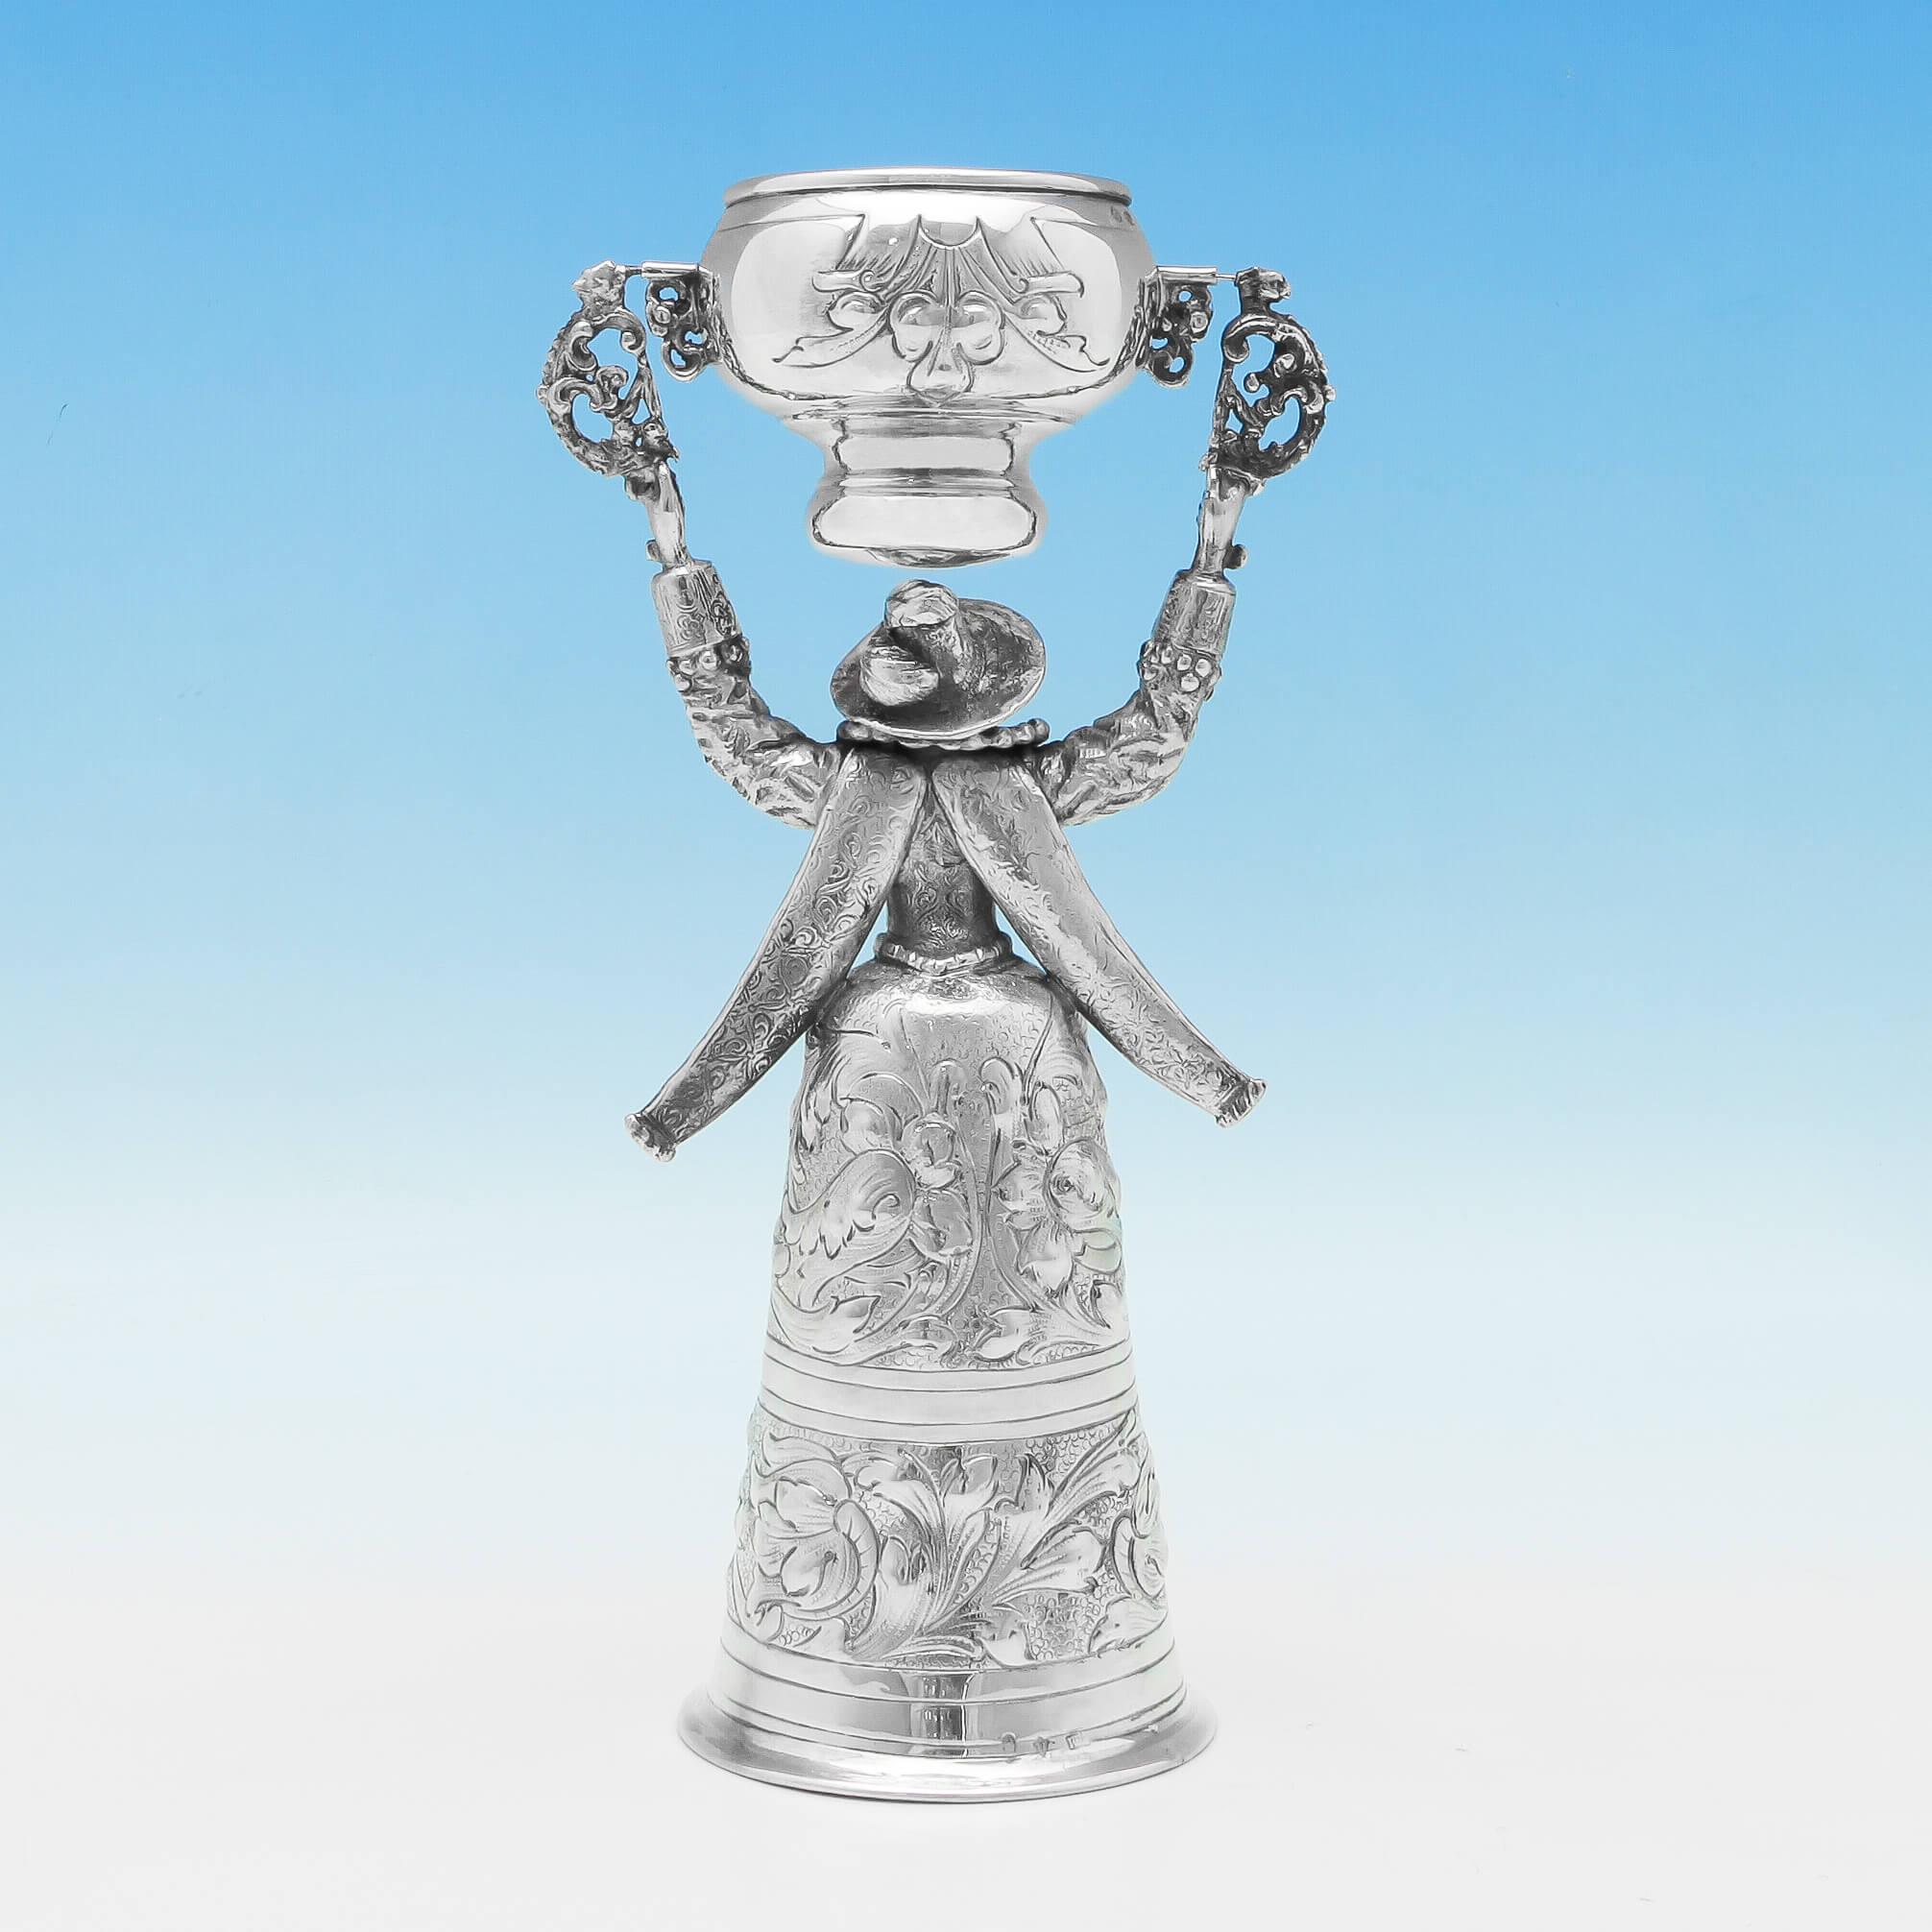 Carrying import marks for London in 1911 by Berthold Muller, this charming, Antique, Sterling Silver Wager Cup, is modelled as a bearded man in drag, with his skirt forming the larger cup. The wager cup measures 9